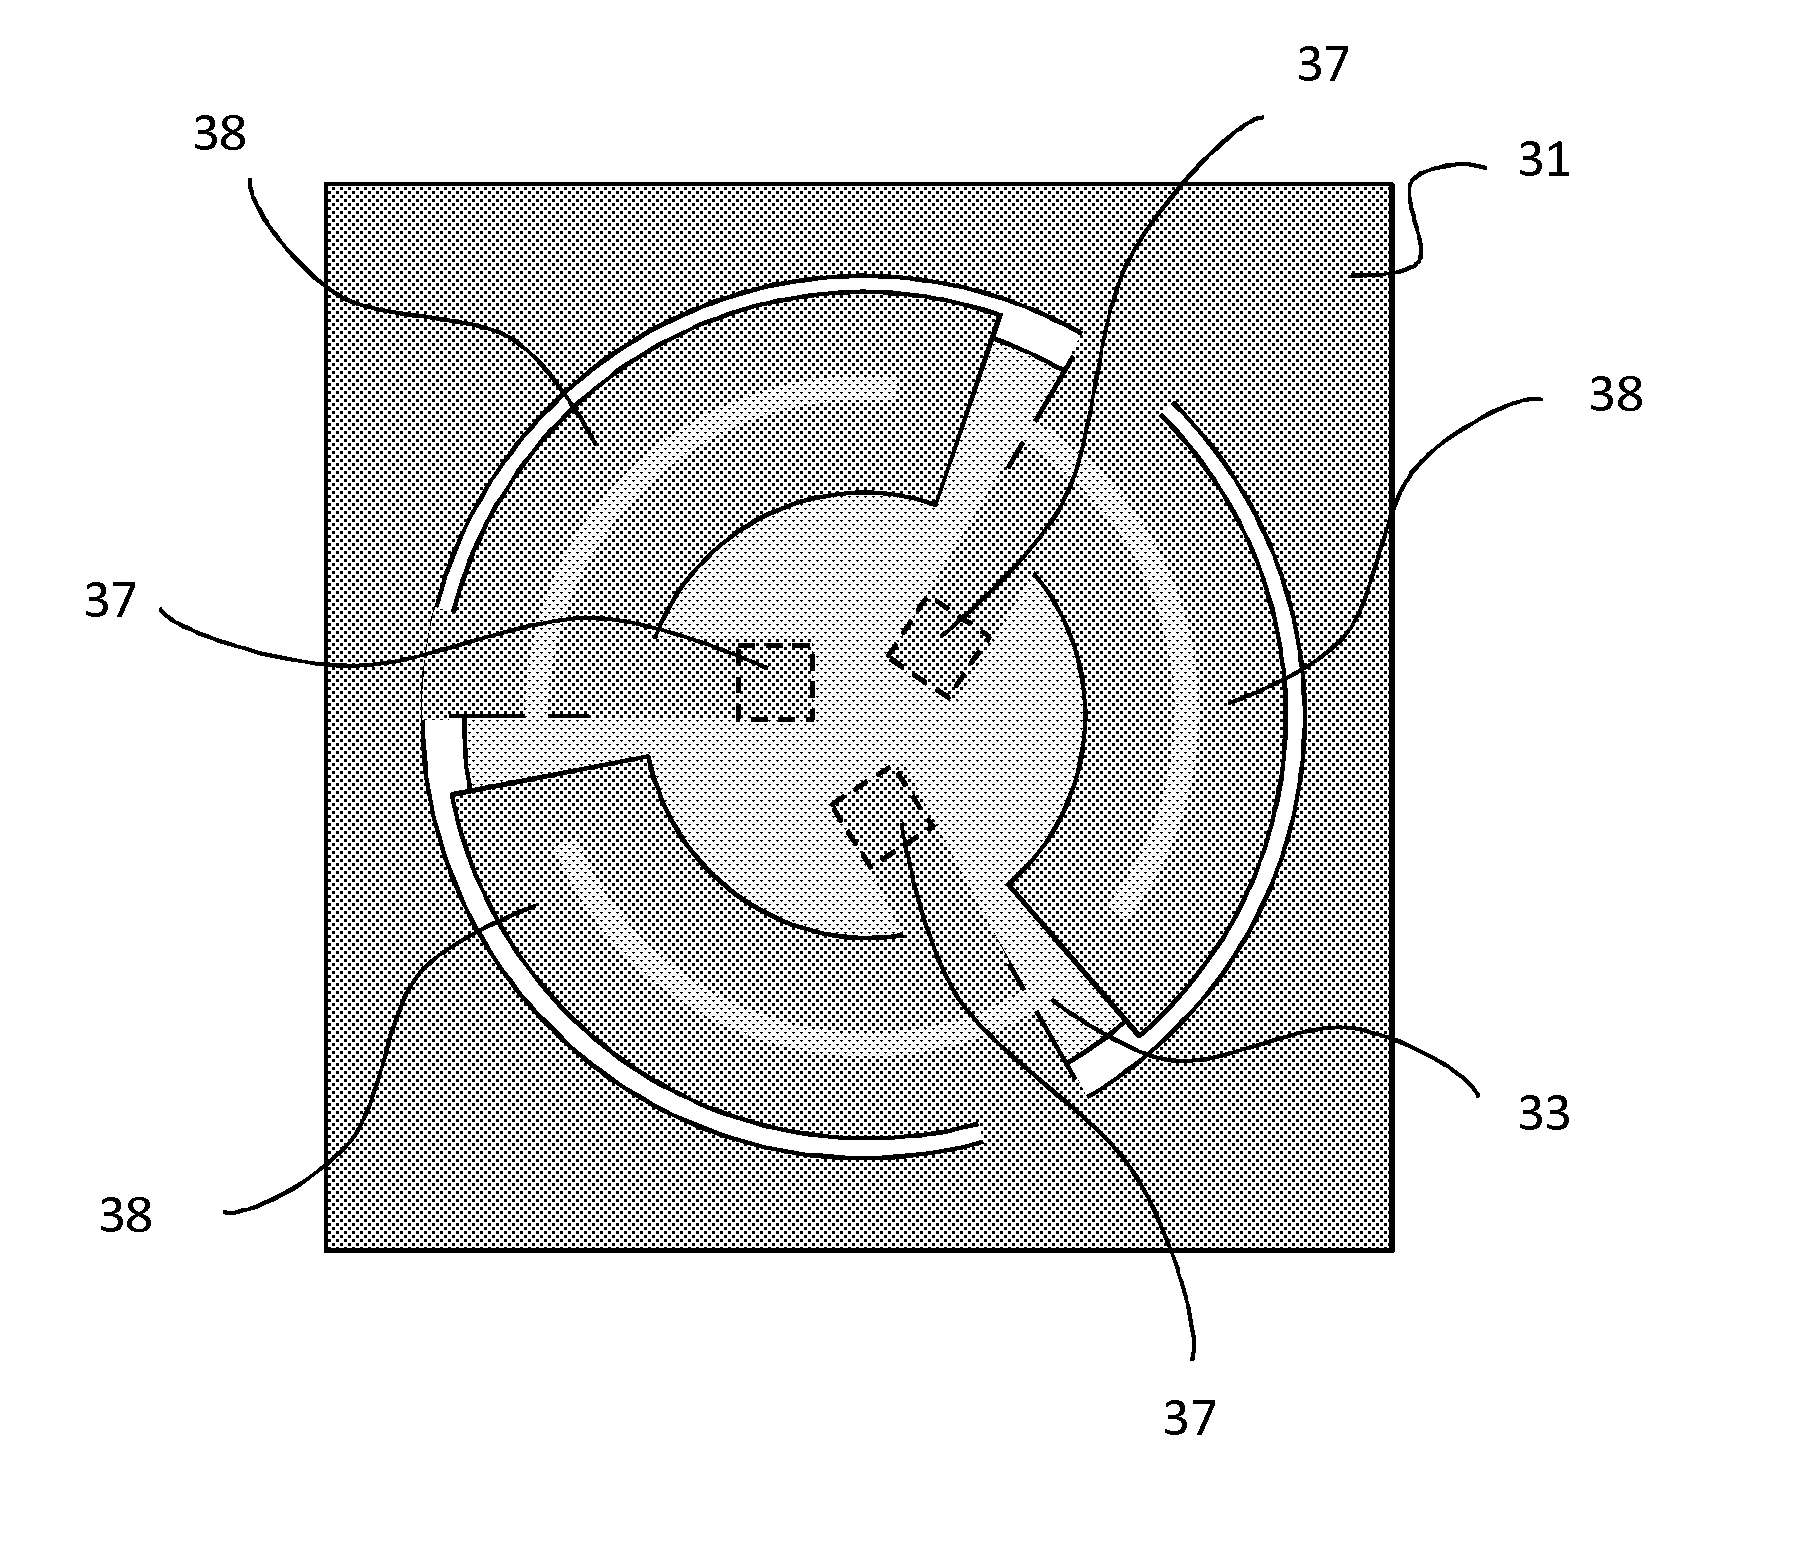 Micro-optical electromechanical device and method for manufacturing it